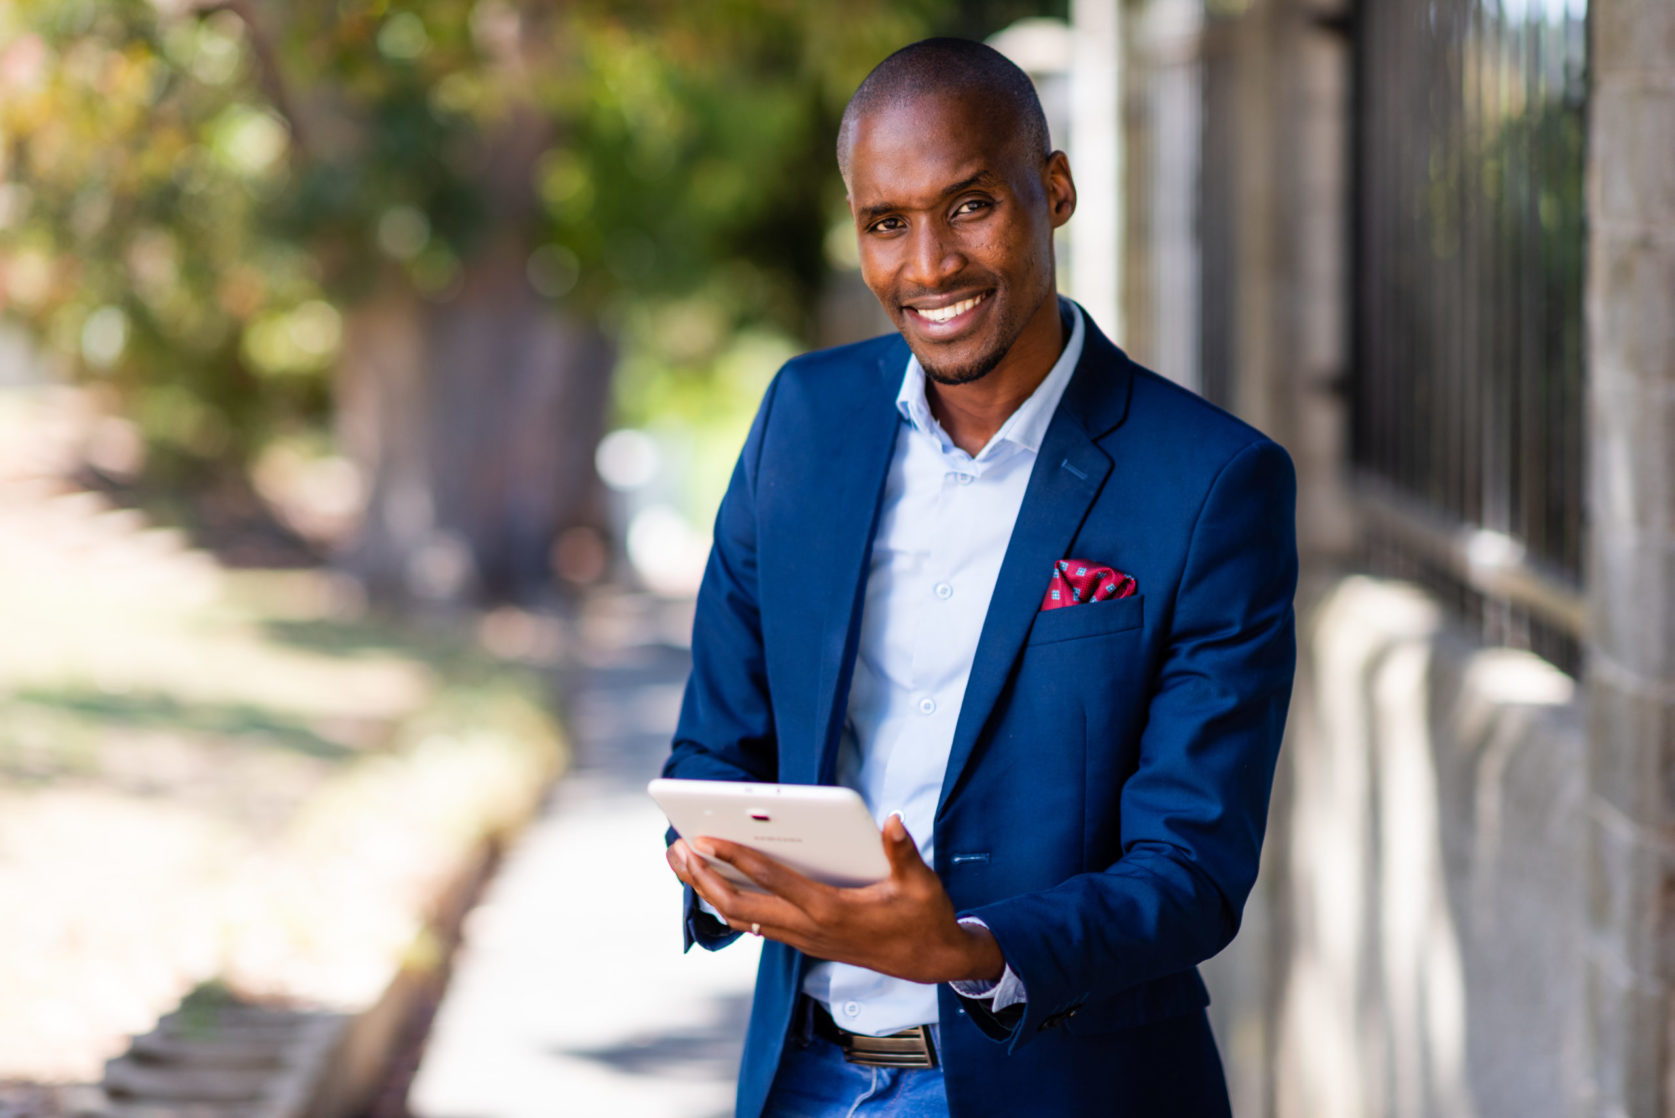 What’s needed to drive youth employment in South Africa?